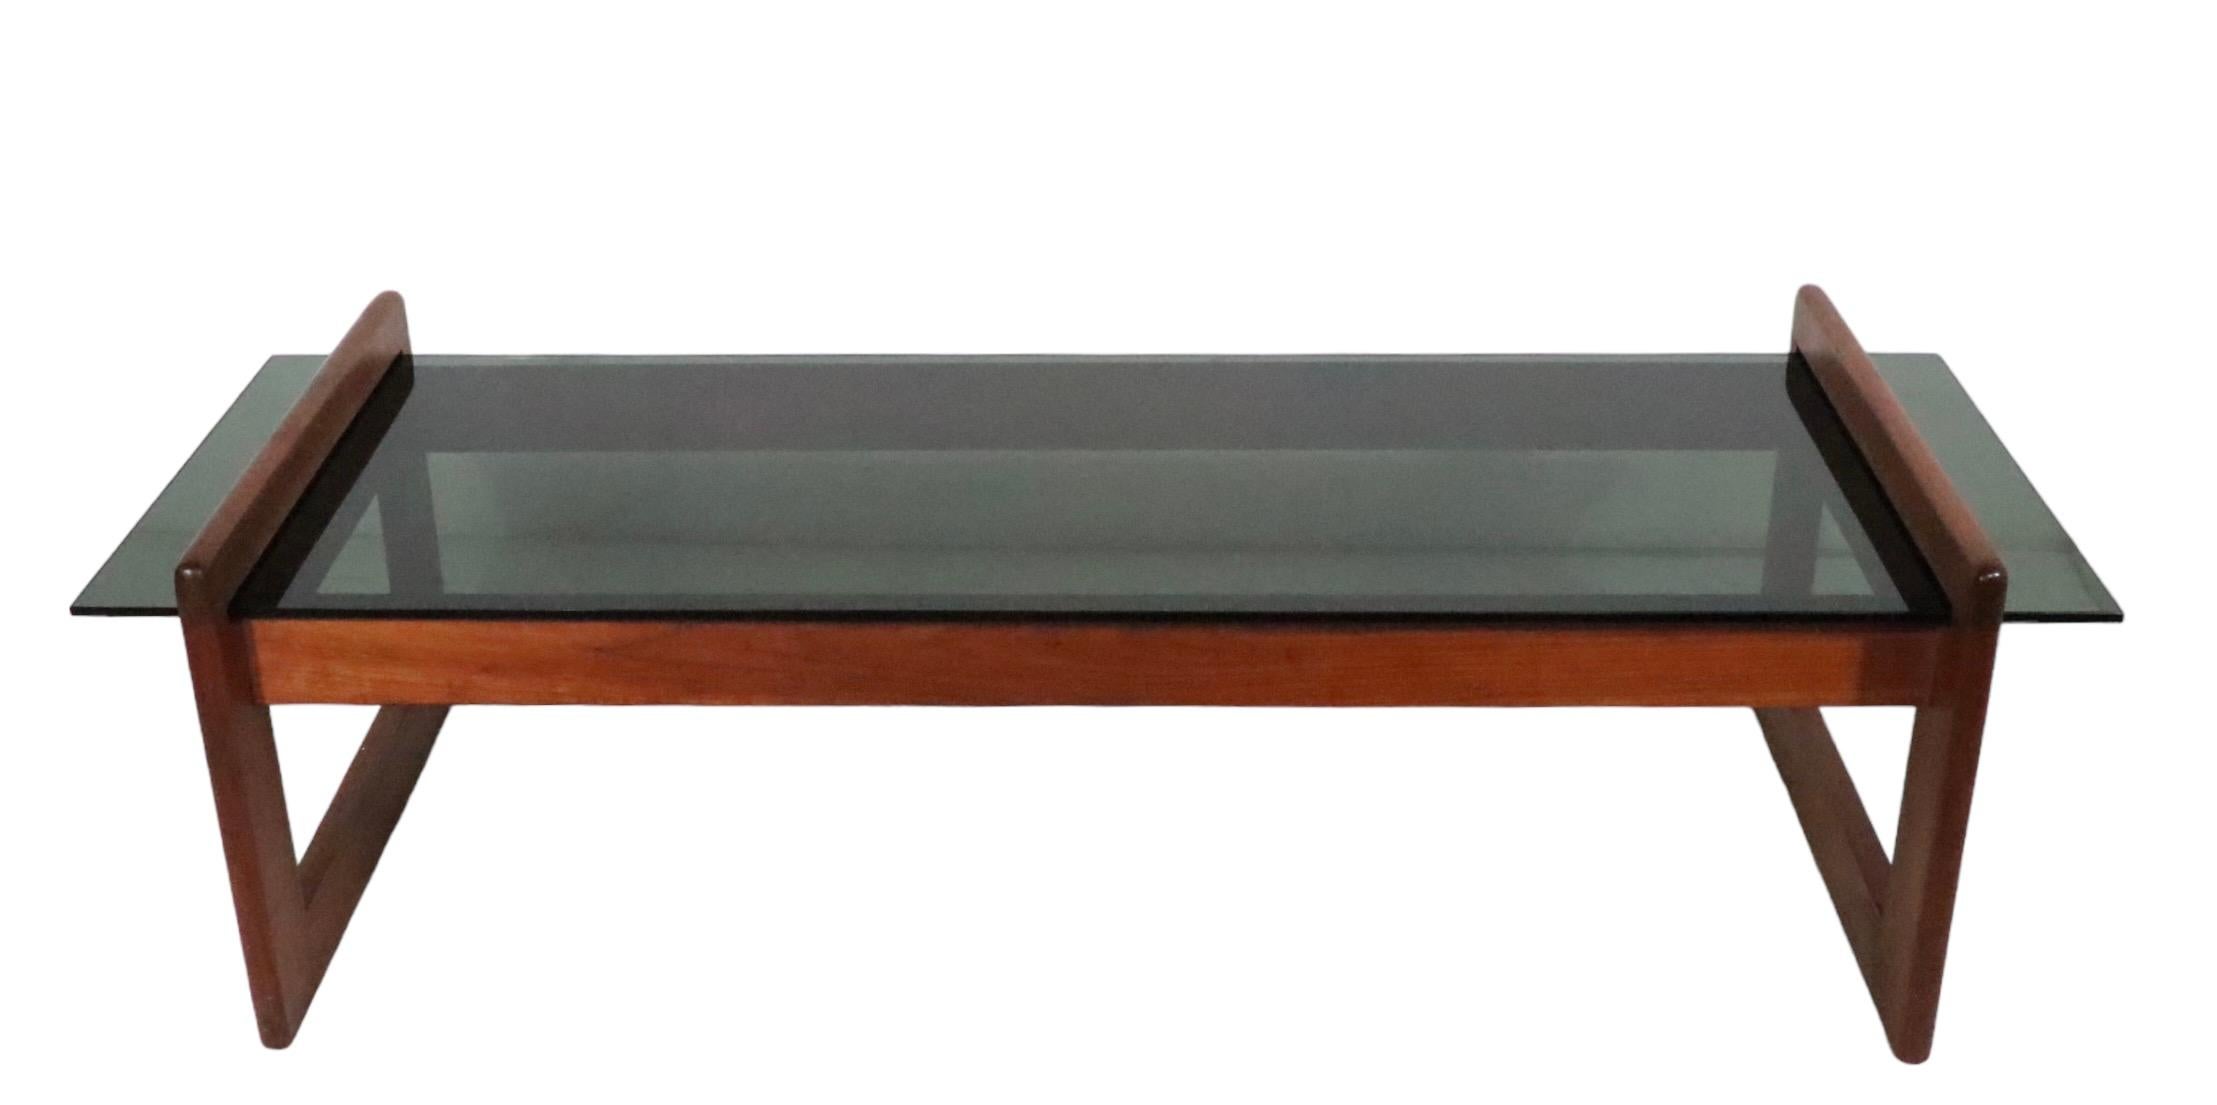 American Mid Century Wood and Glass Coffee Table Designed by Adrian Pearsall c 1970's For Sale